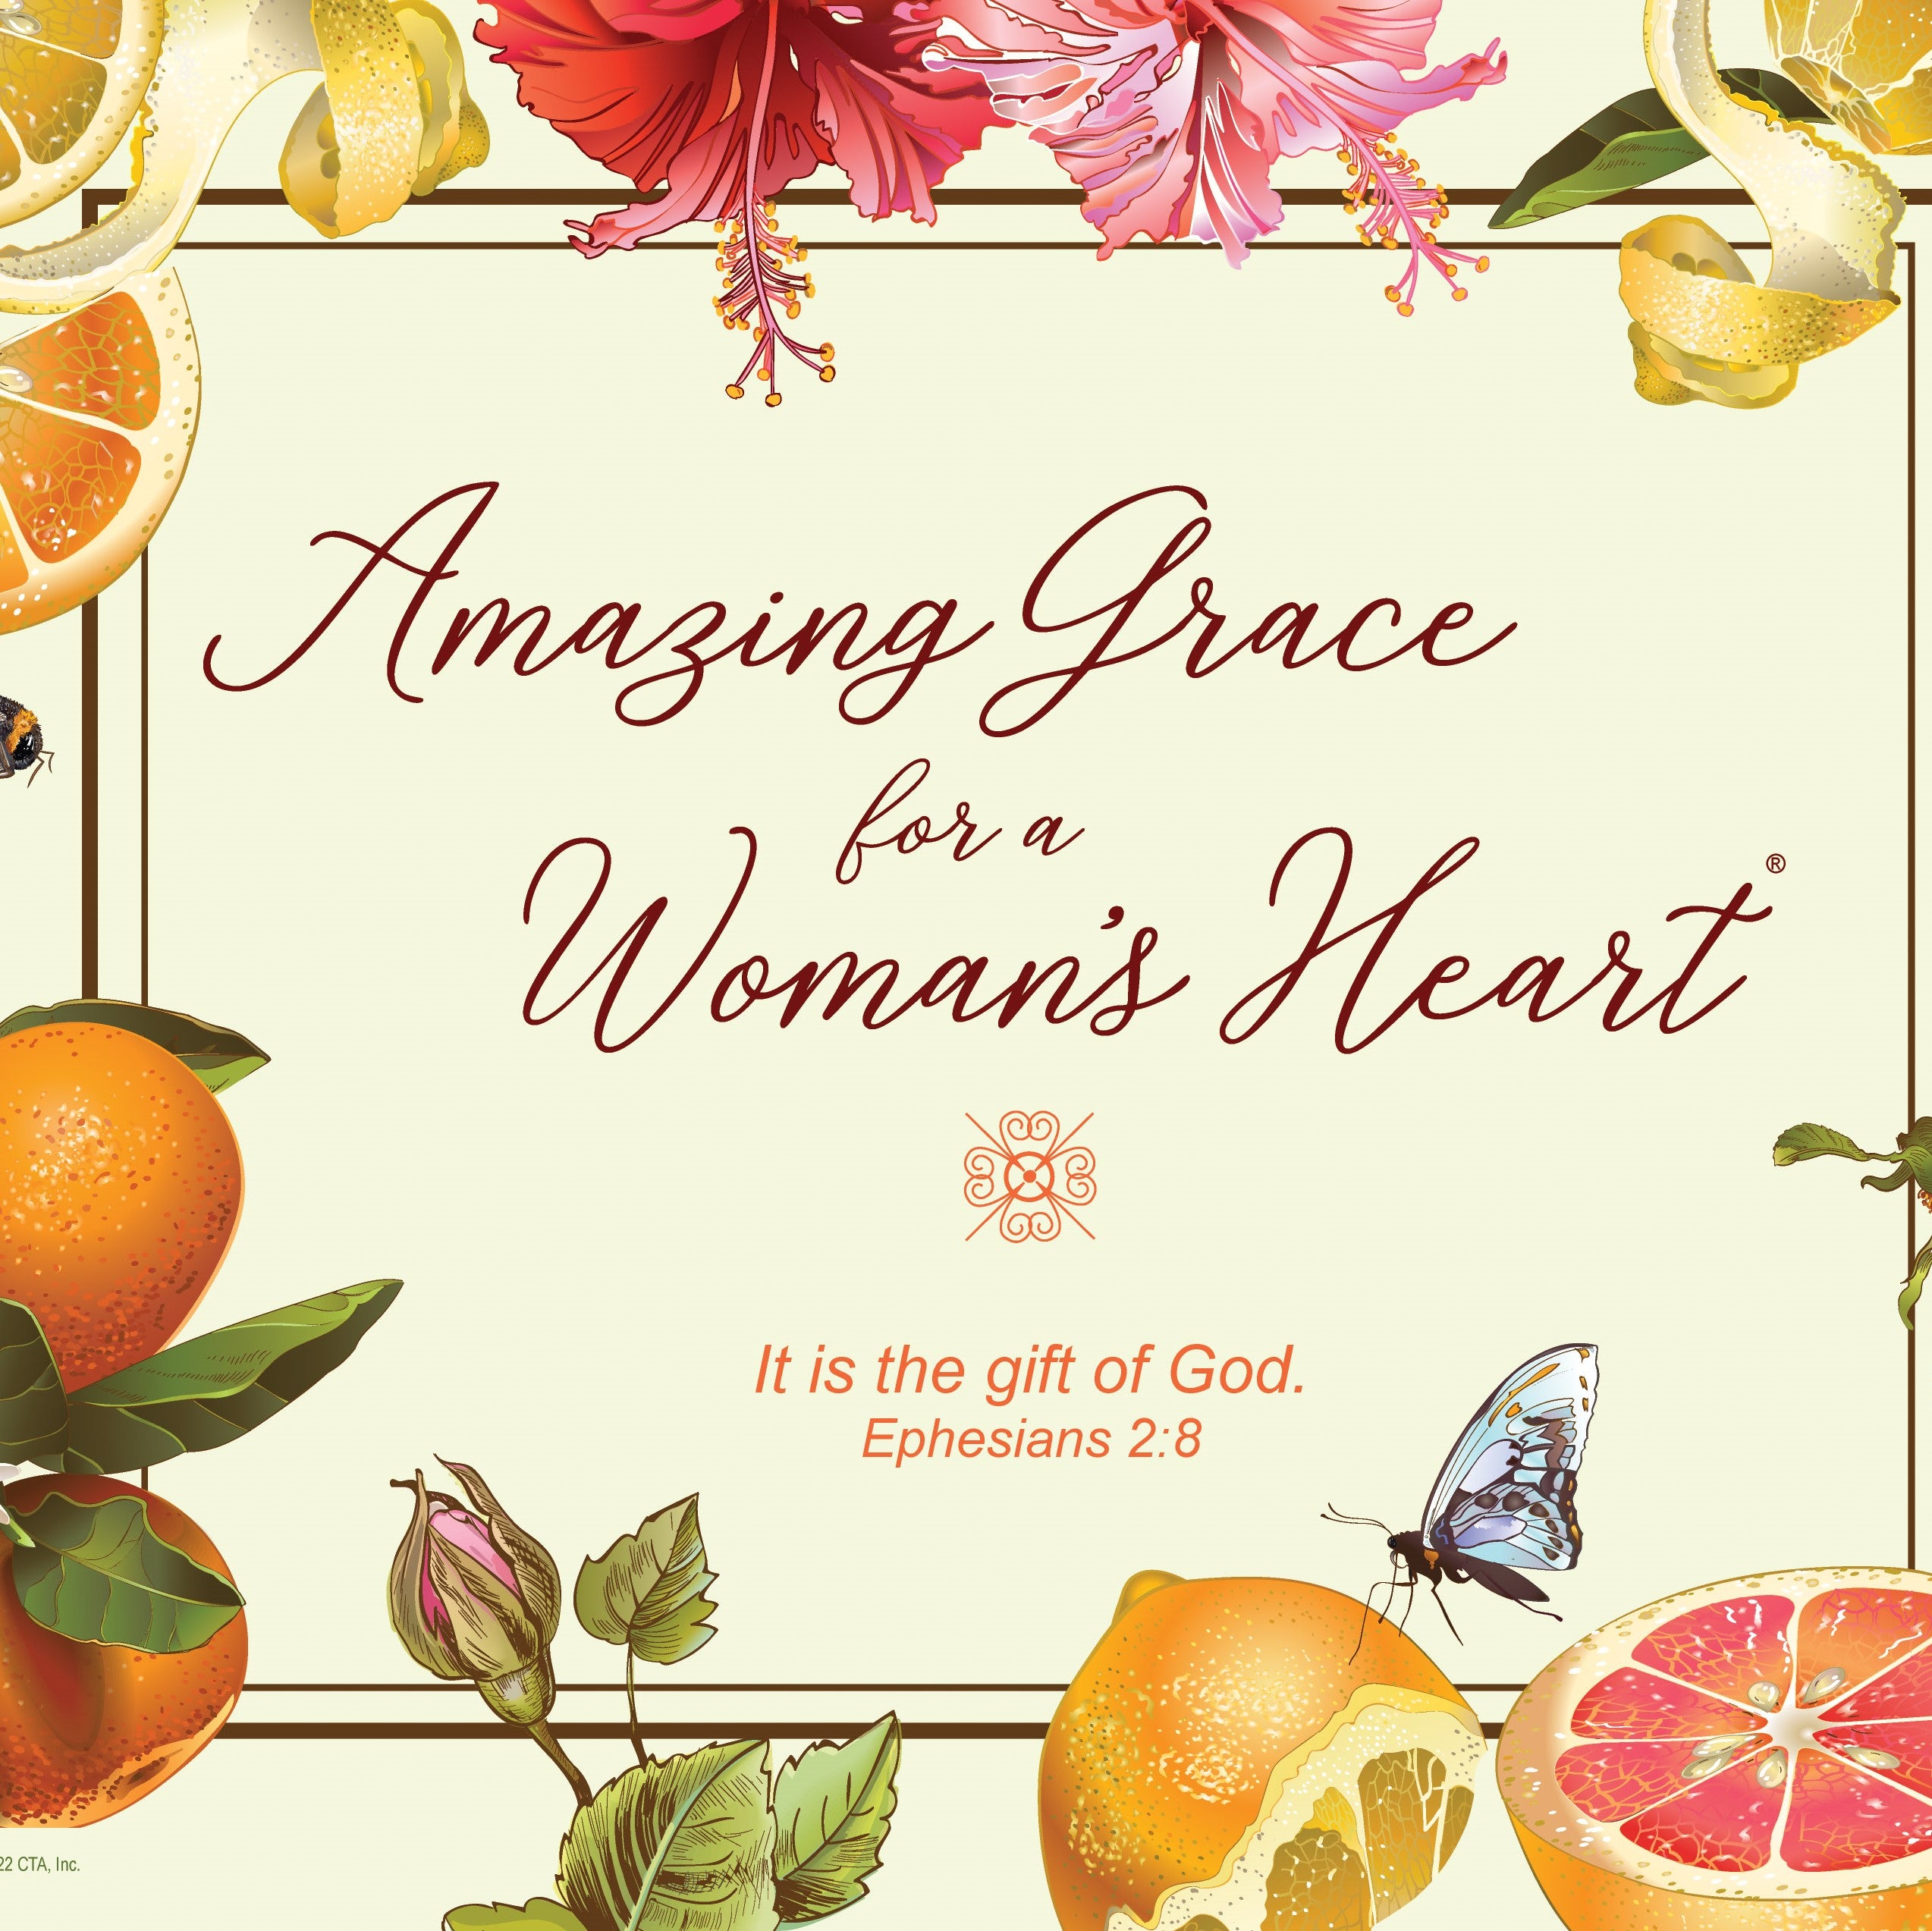 Amazing Grace for a Woman's Heart®